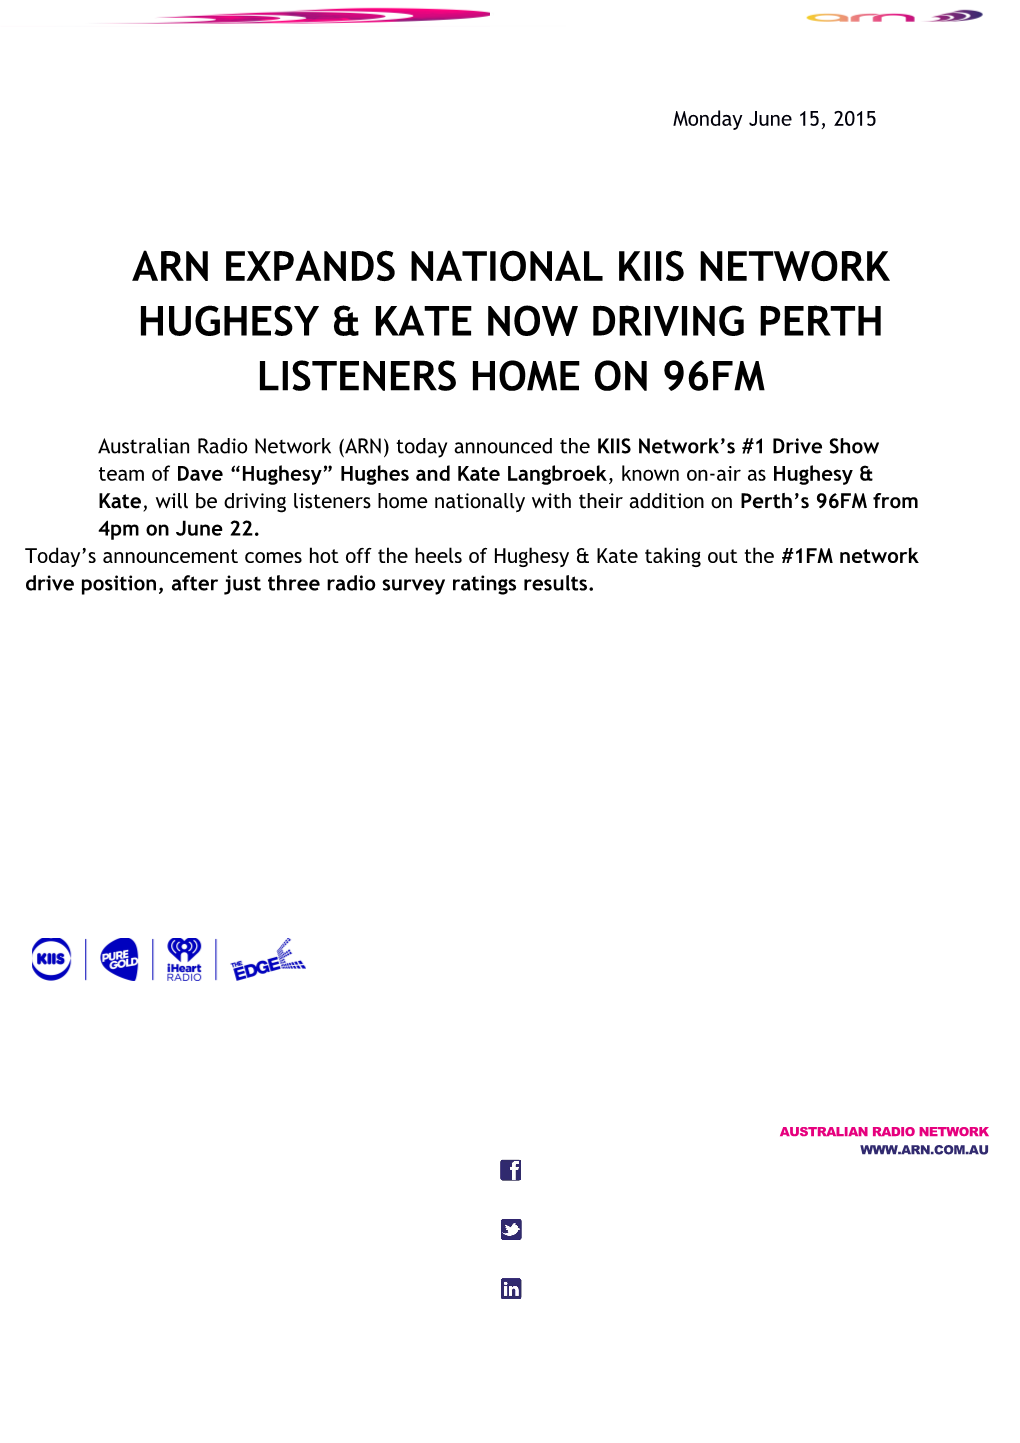 Arn Expands National Kiis Networkhughesy & Kate Now Driving Perth Listeners Home on 96Fm